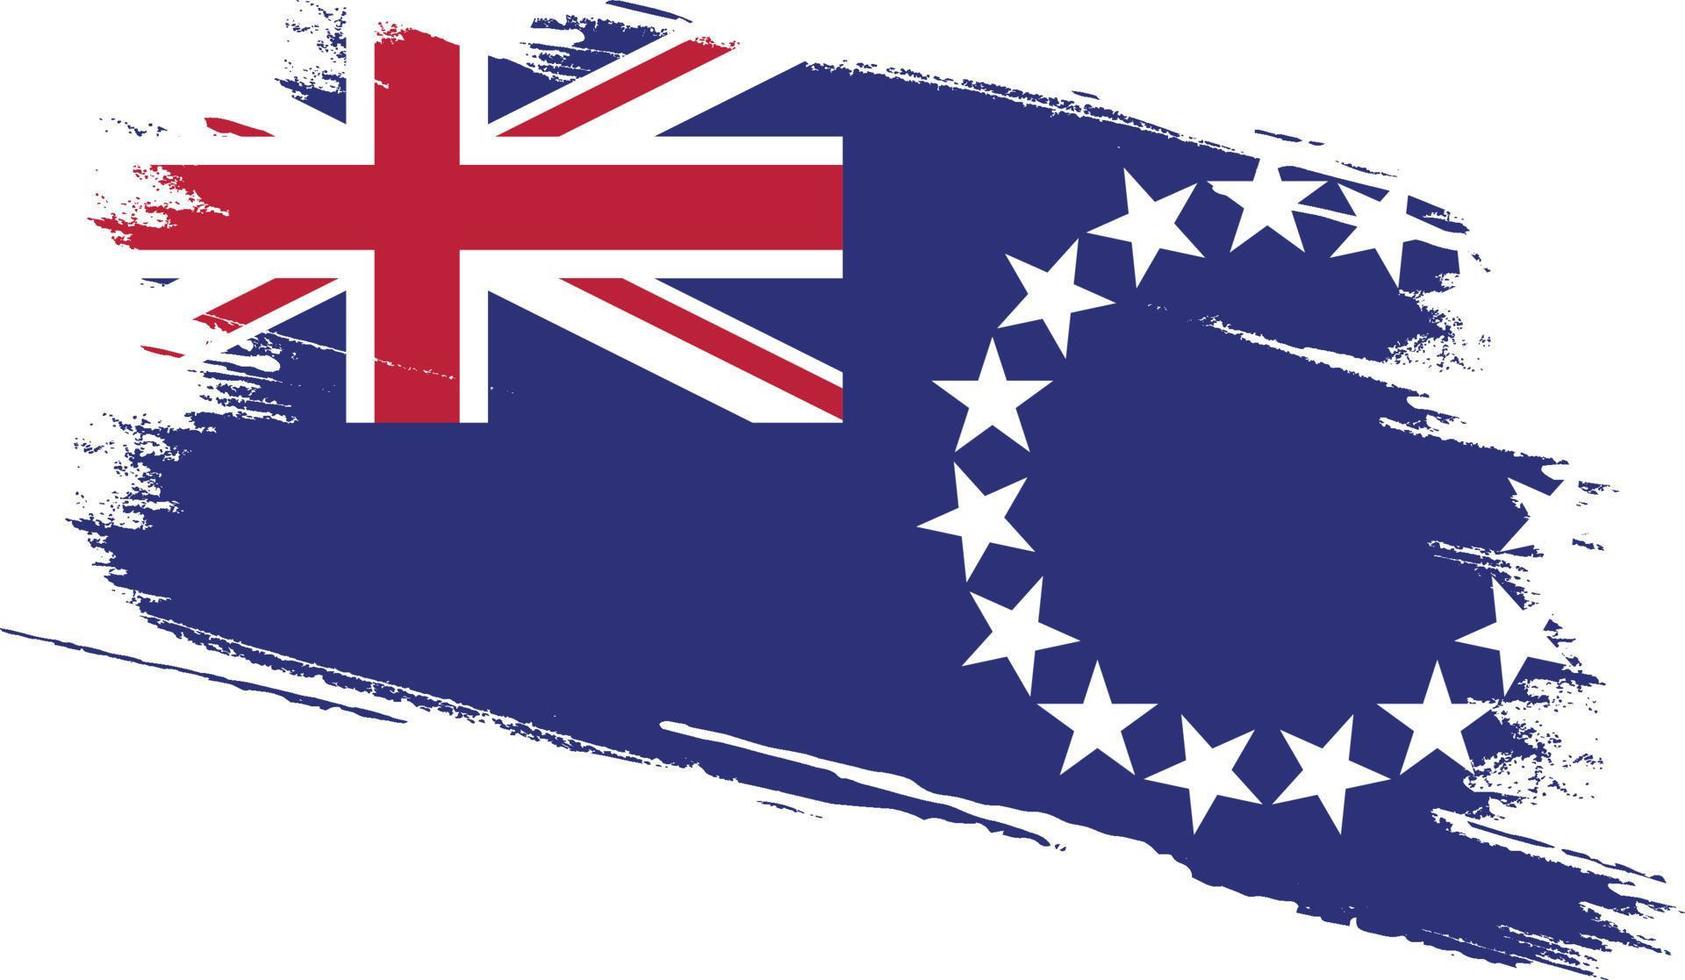 Cook Islands flag with grunge texture vector